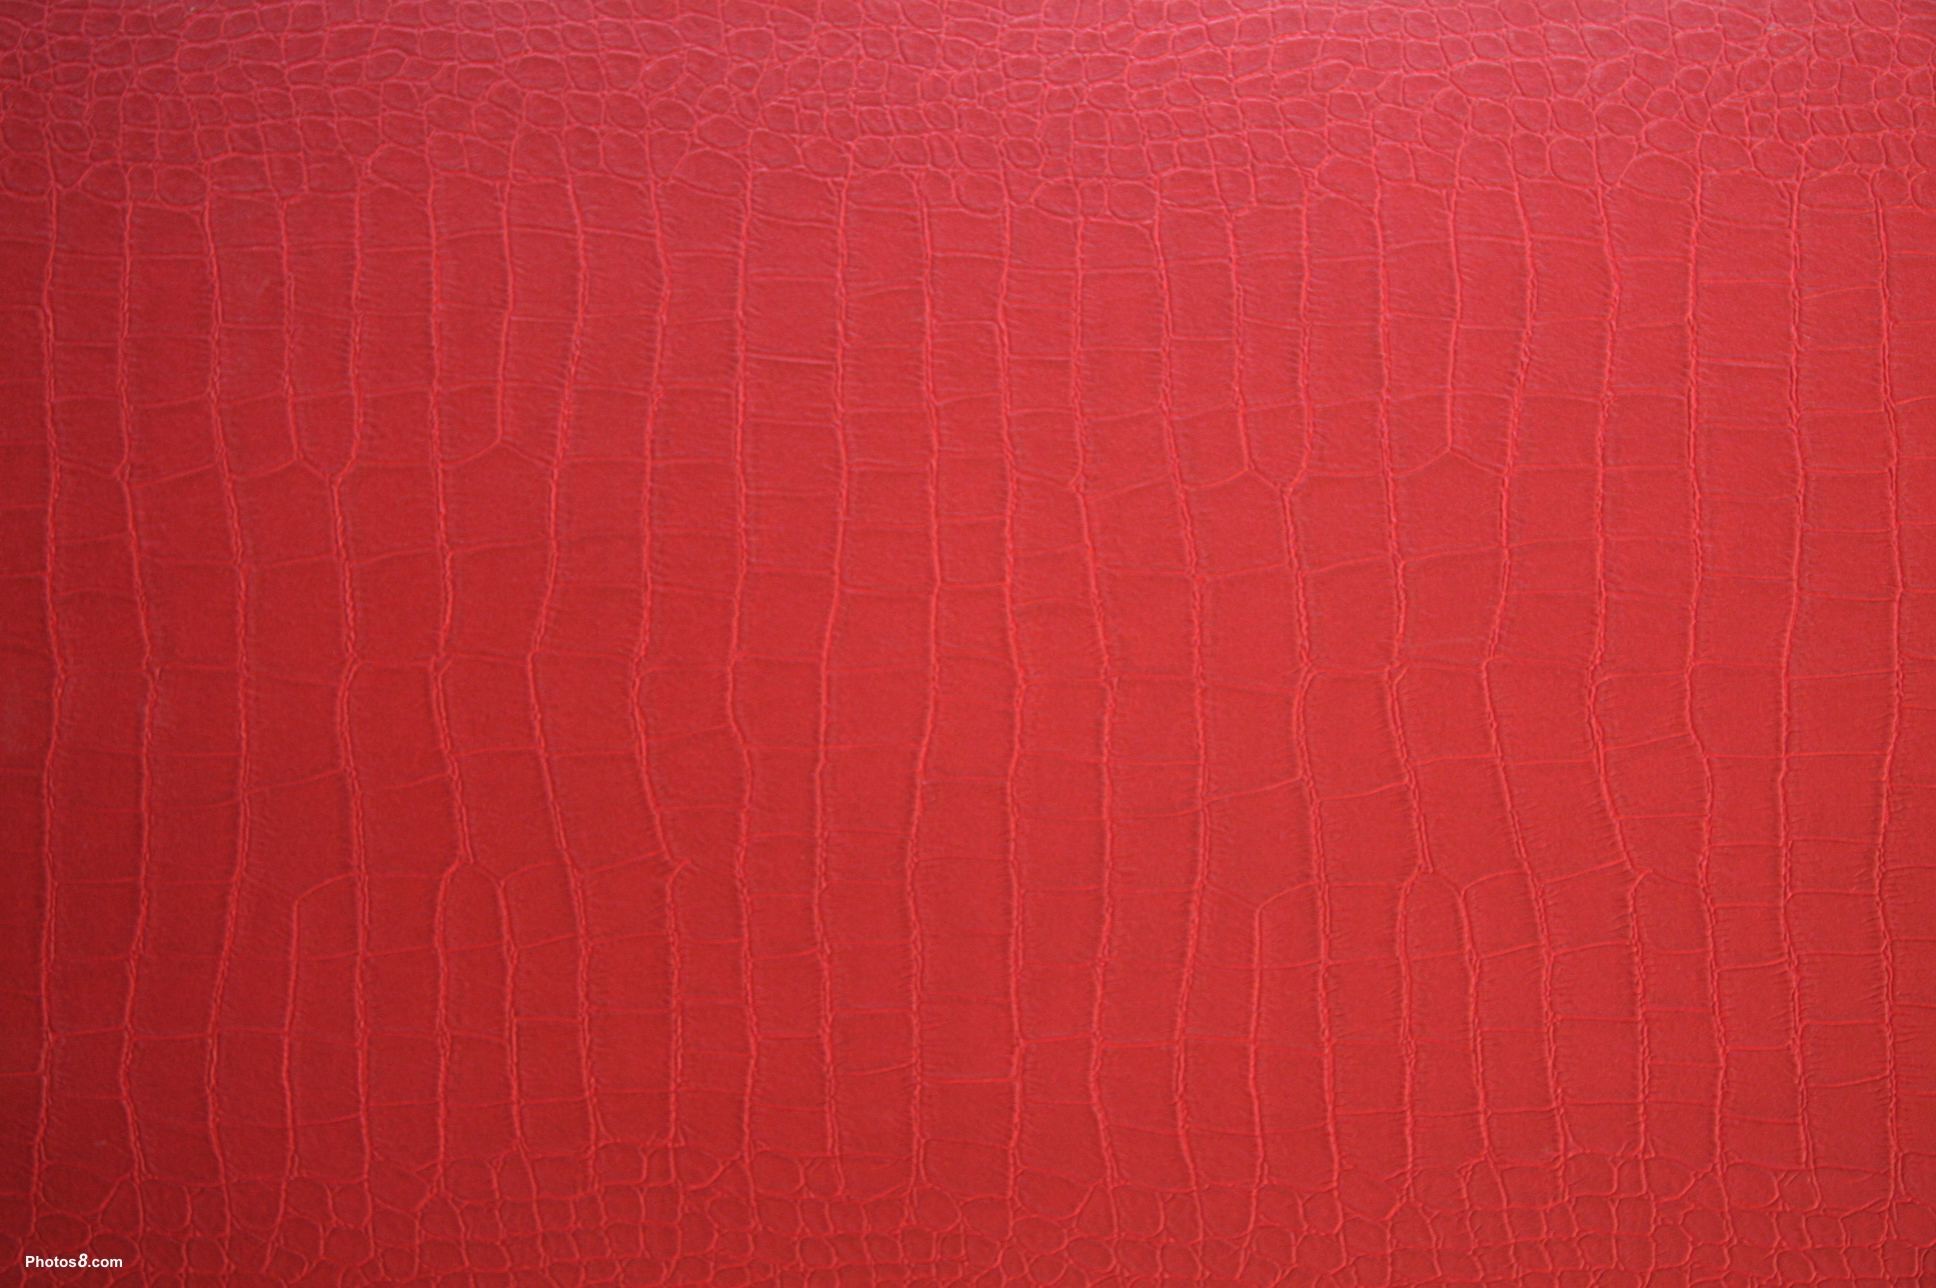 1936x1288 Pin Red Leather In The Wood Texture Backgrounds Ipad Iphone Ipodzcom .